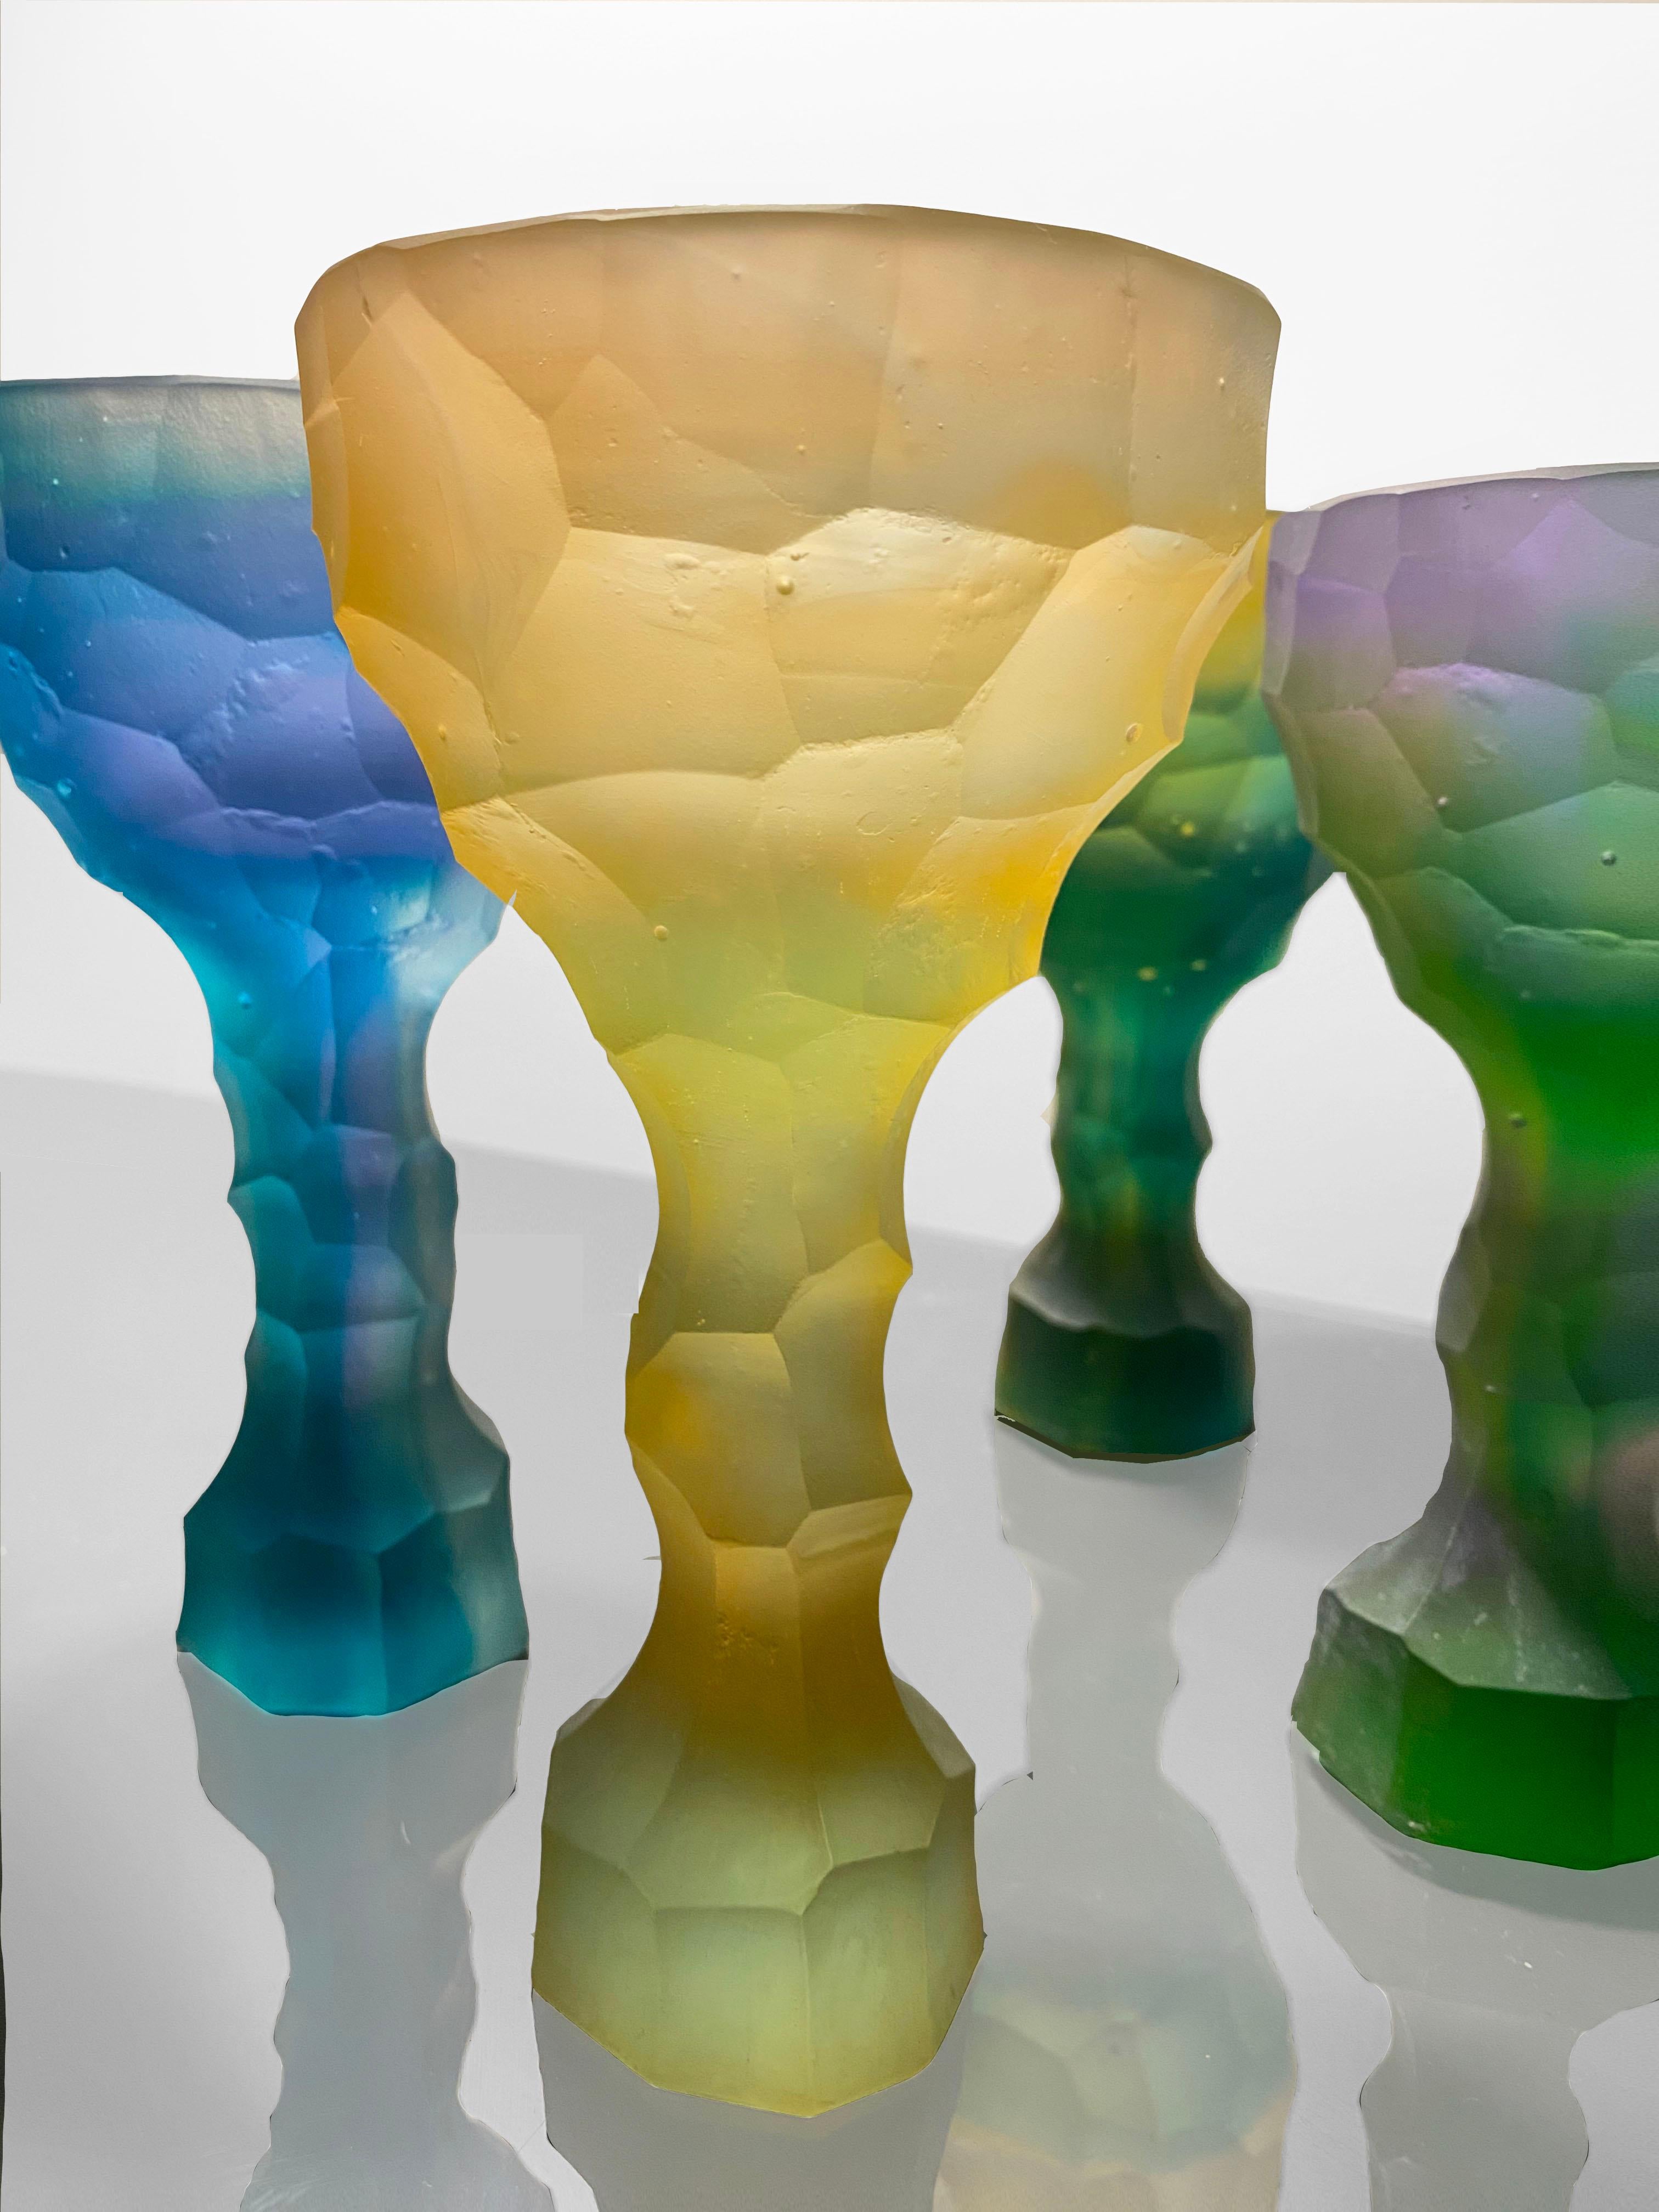 French Set of 4 Hand-Sculpted Crystal Glass by Alissa Volchkova